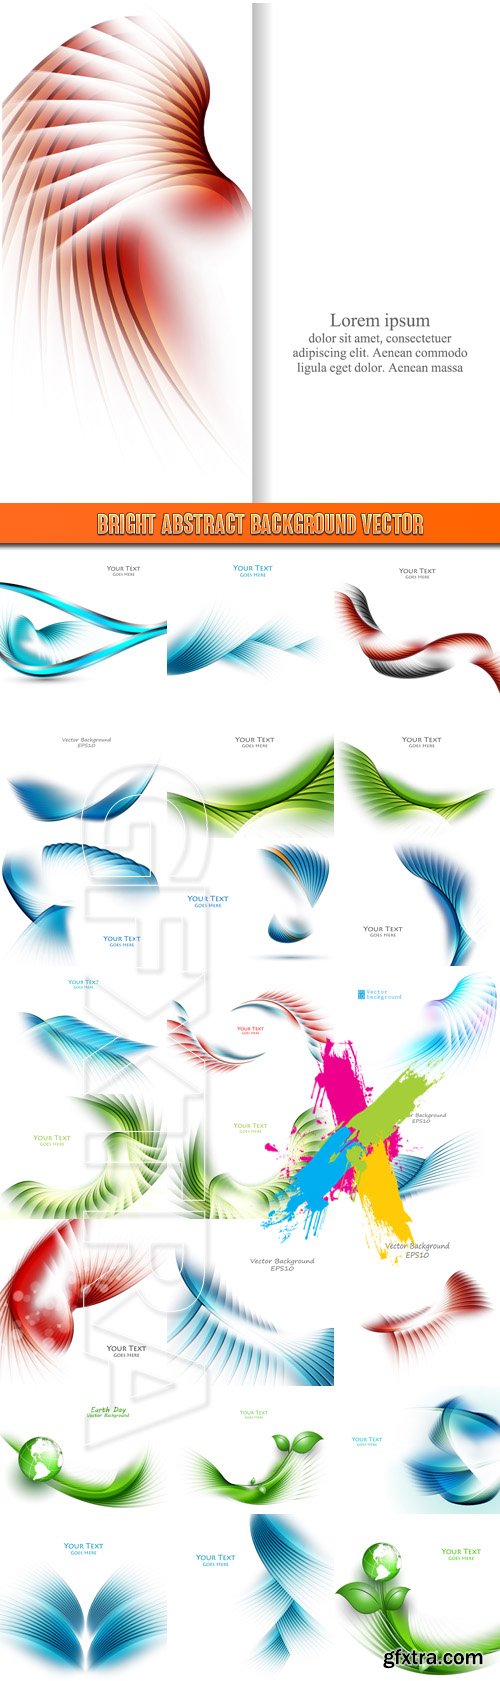 Bright abstract background vector